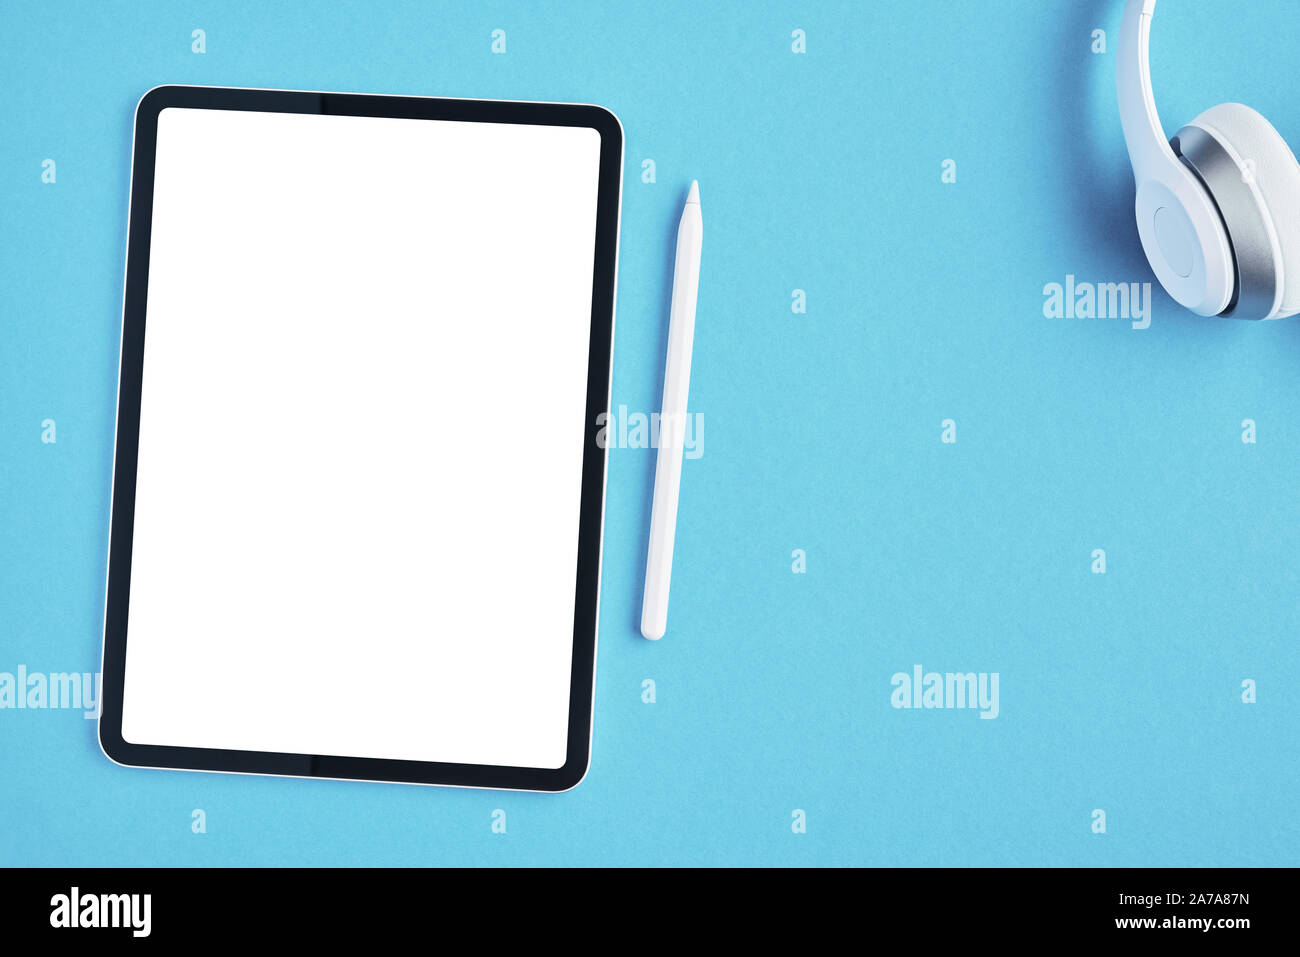 Tablet mockup with white pencil and white wireless headphones on blue background. Top view. Copy space. Stock Photo